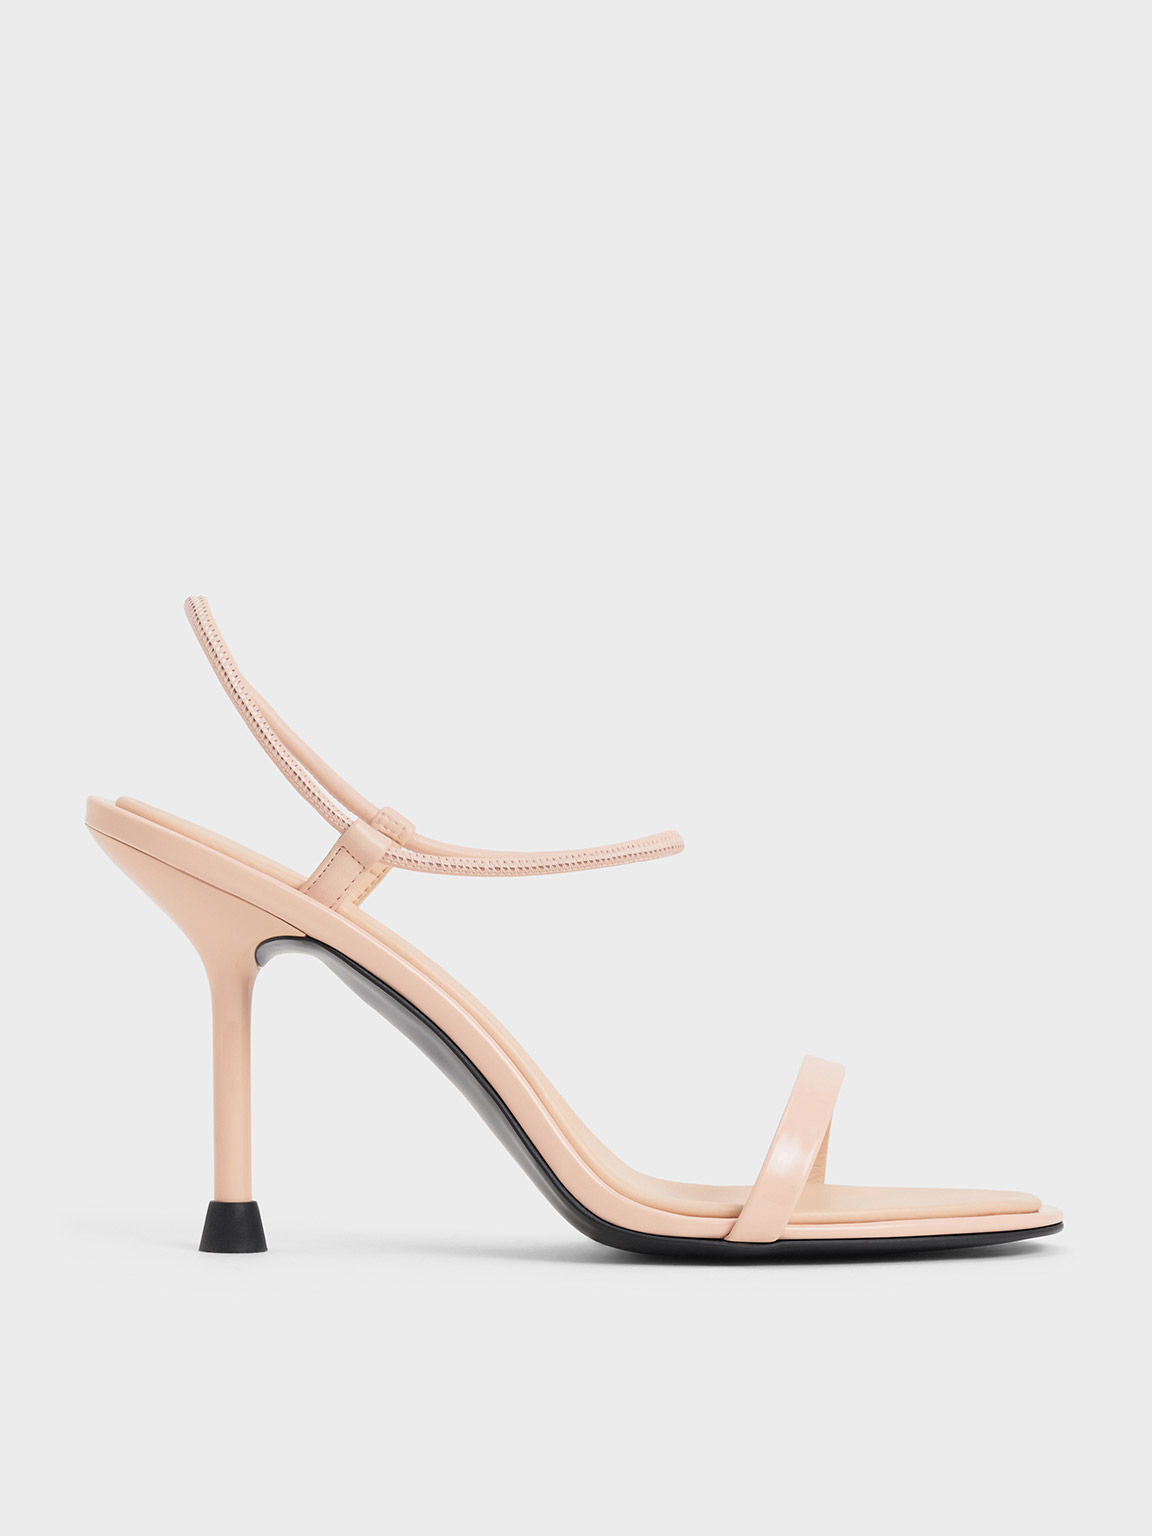 Blush Stiletto-Heel Ankle-Strap Pumps - CHARLES & KEITH US